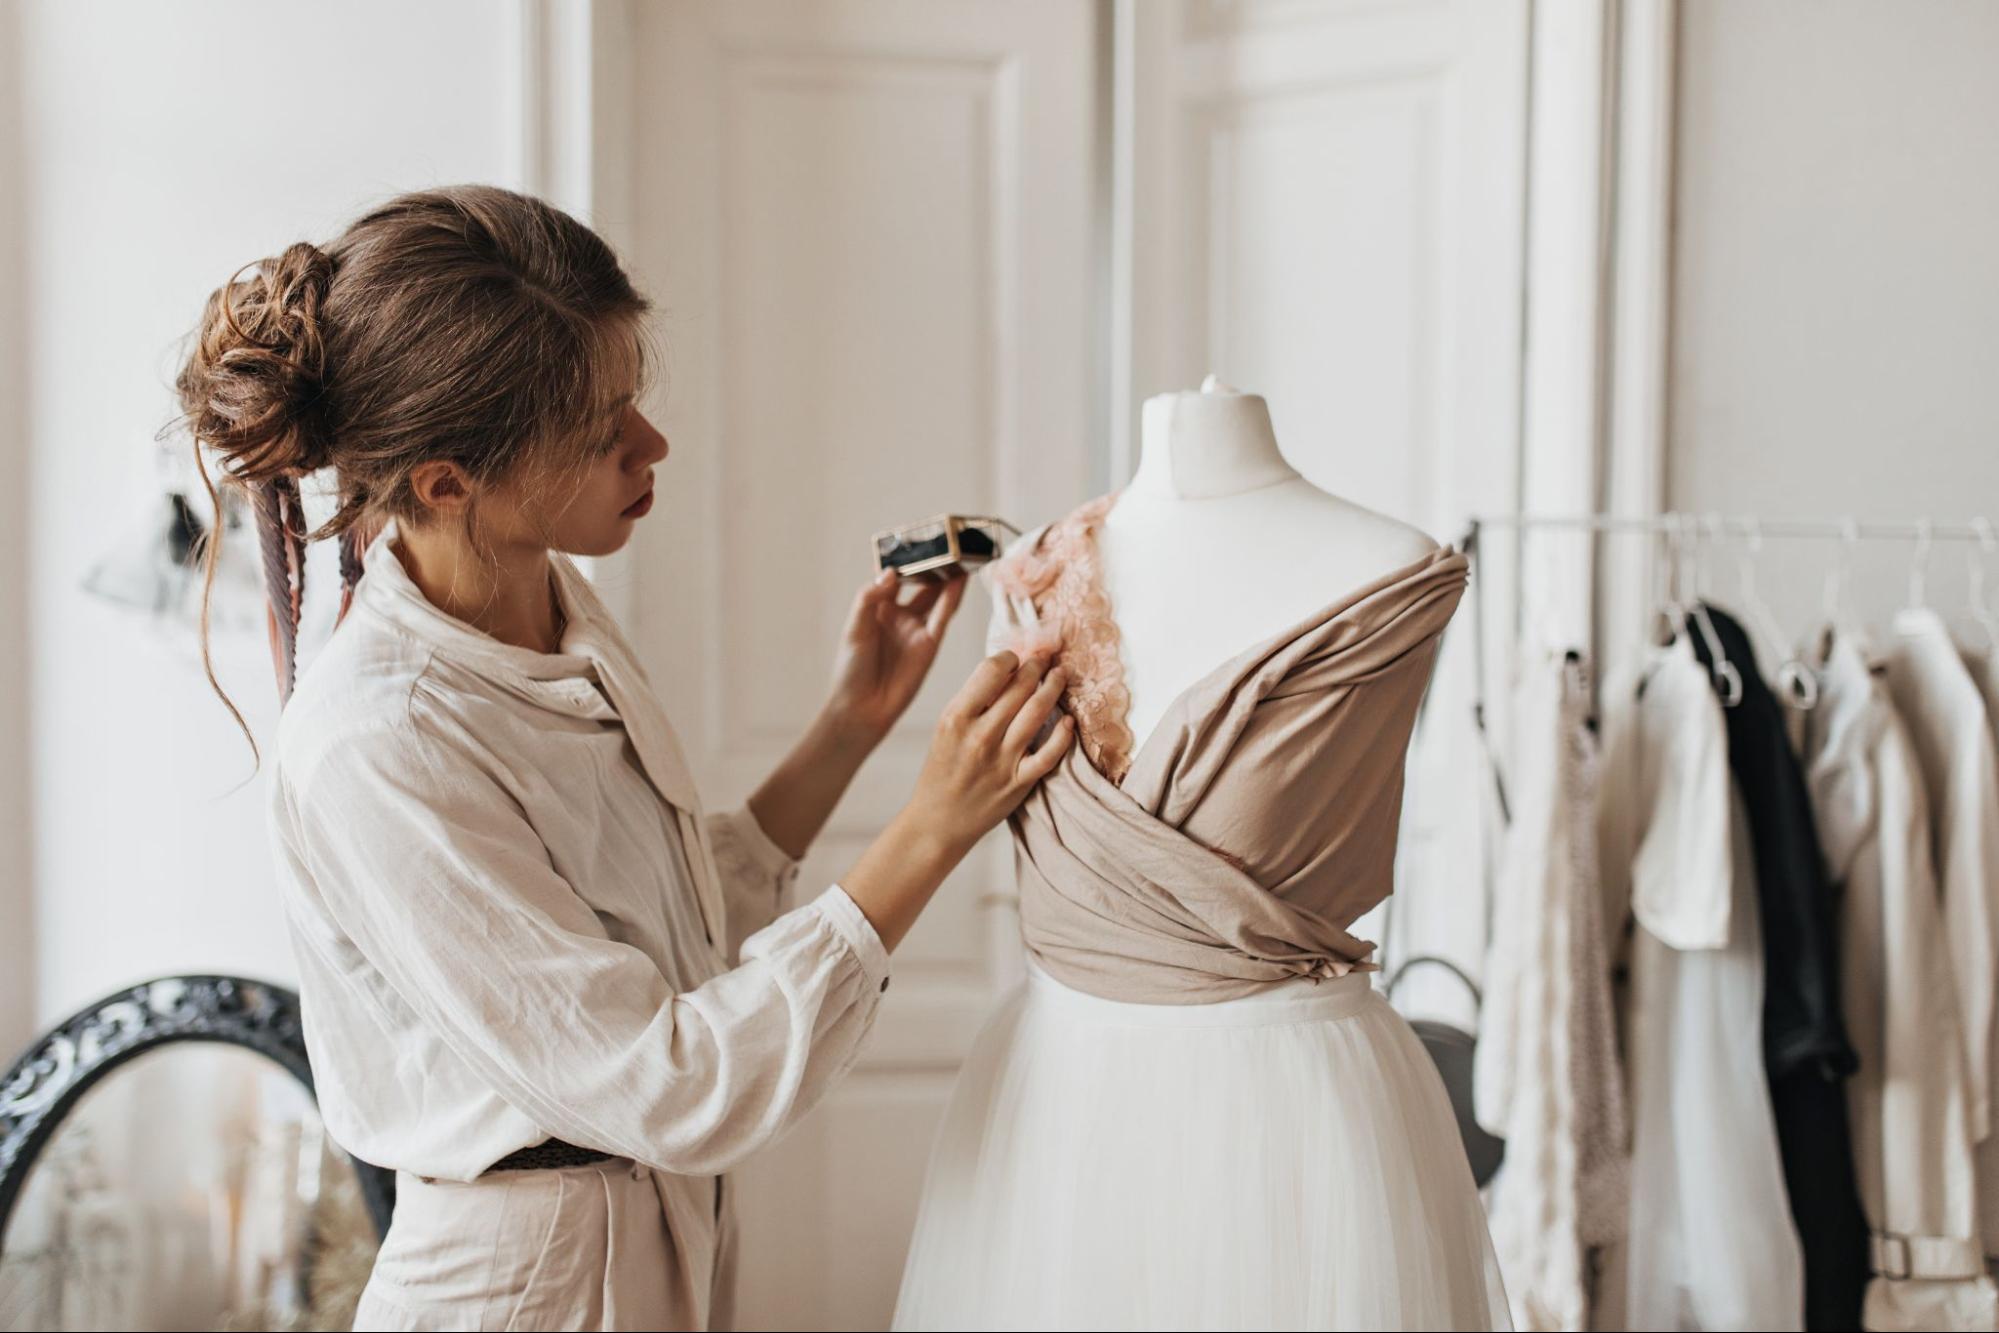 A female designer creating an outfit in a studio